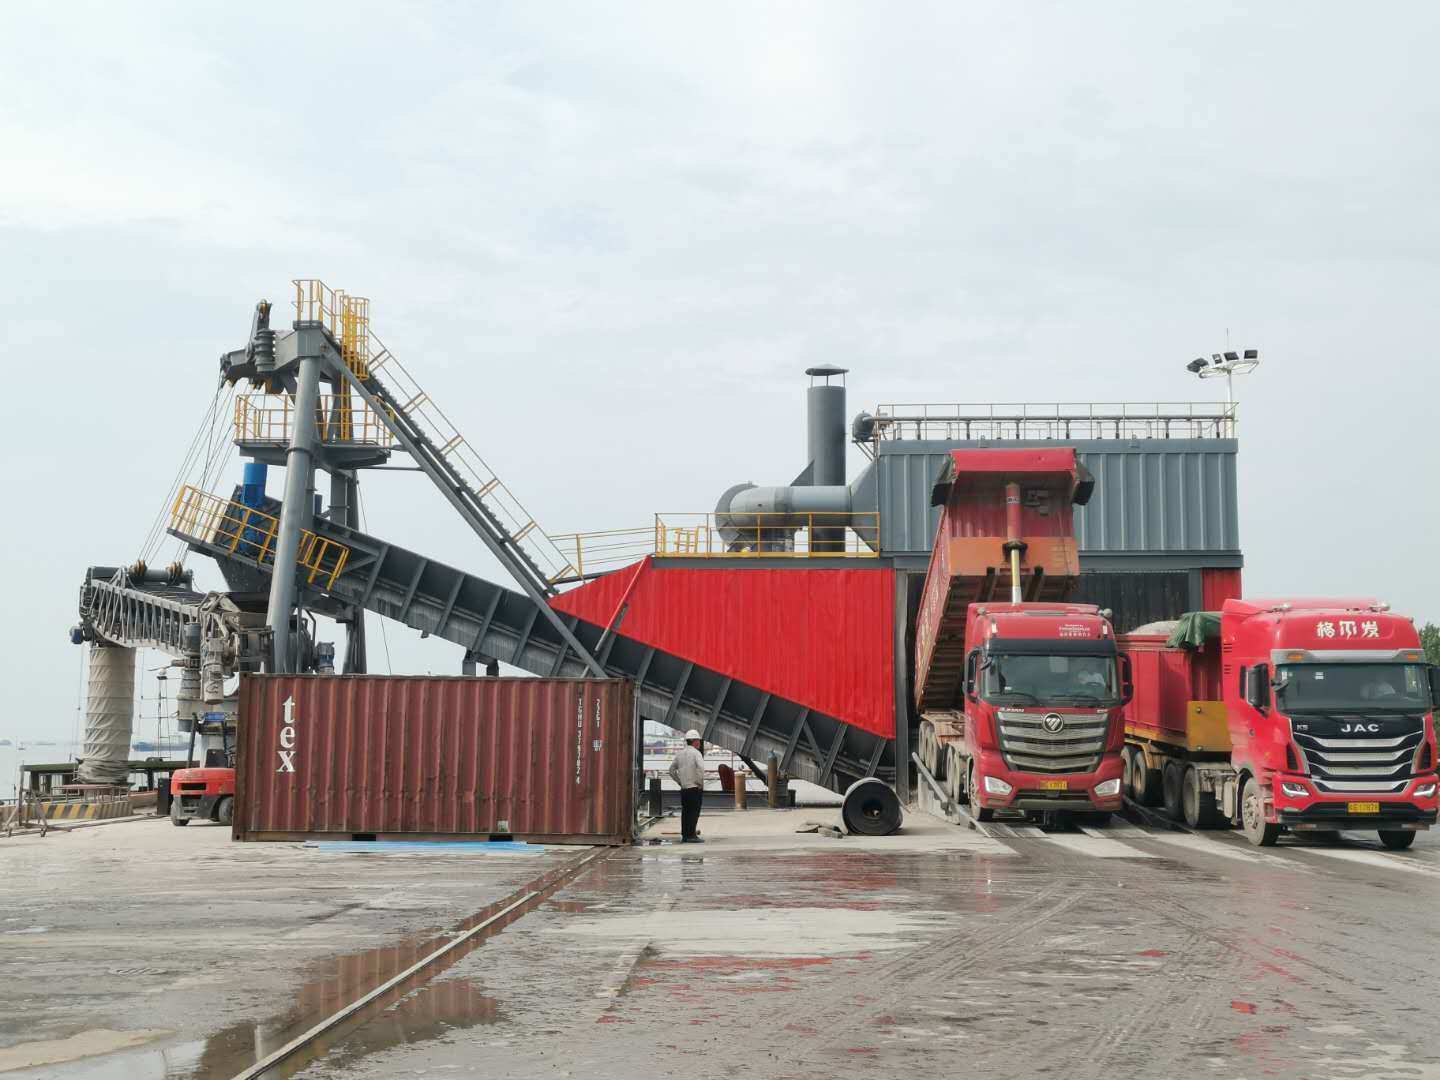 Mobile Ship Loader for Cement with Good Price